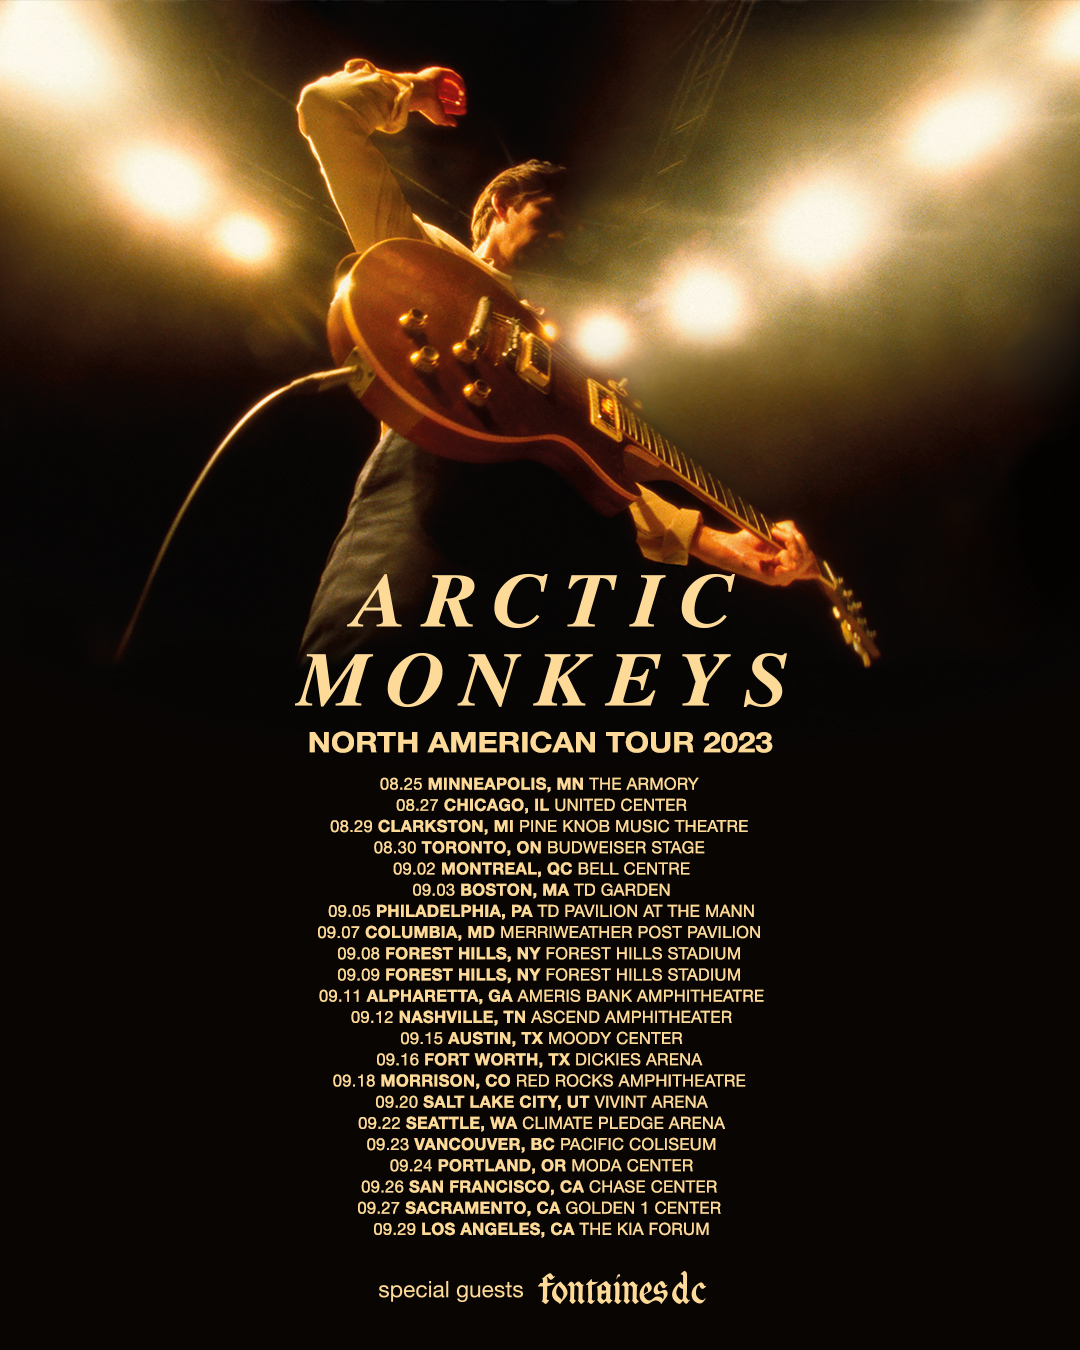 Arctic Monkeys Announce 2023 North American Tour The Rock Revival